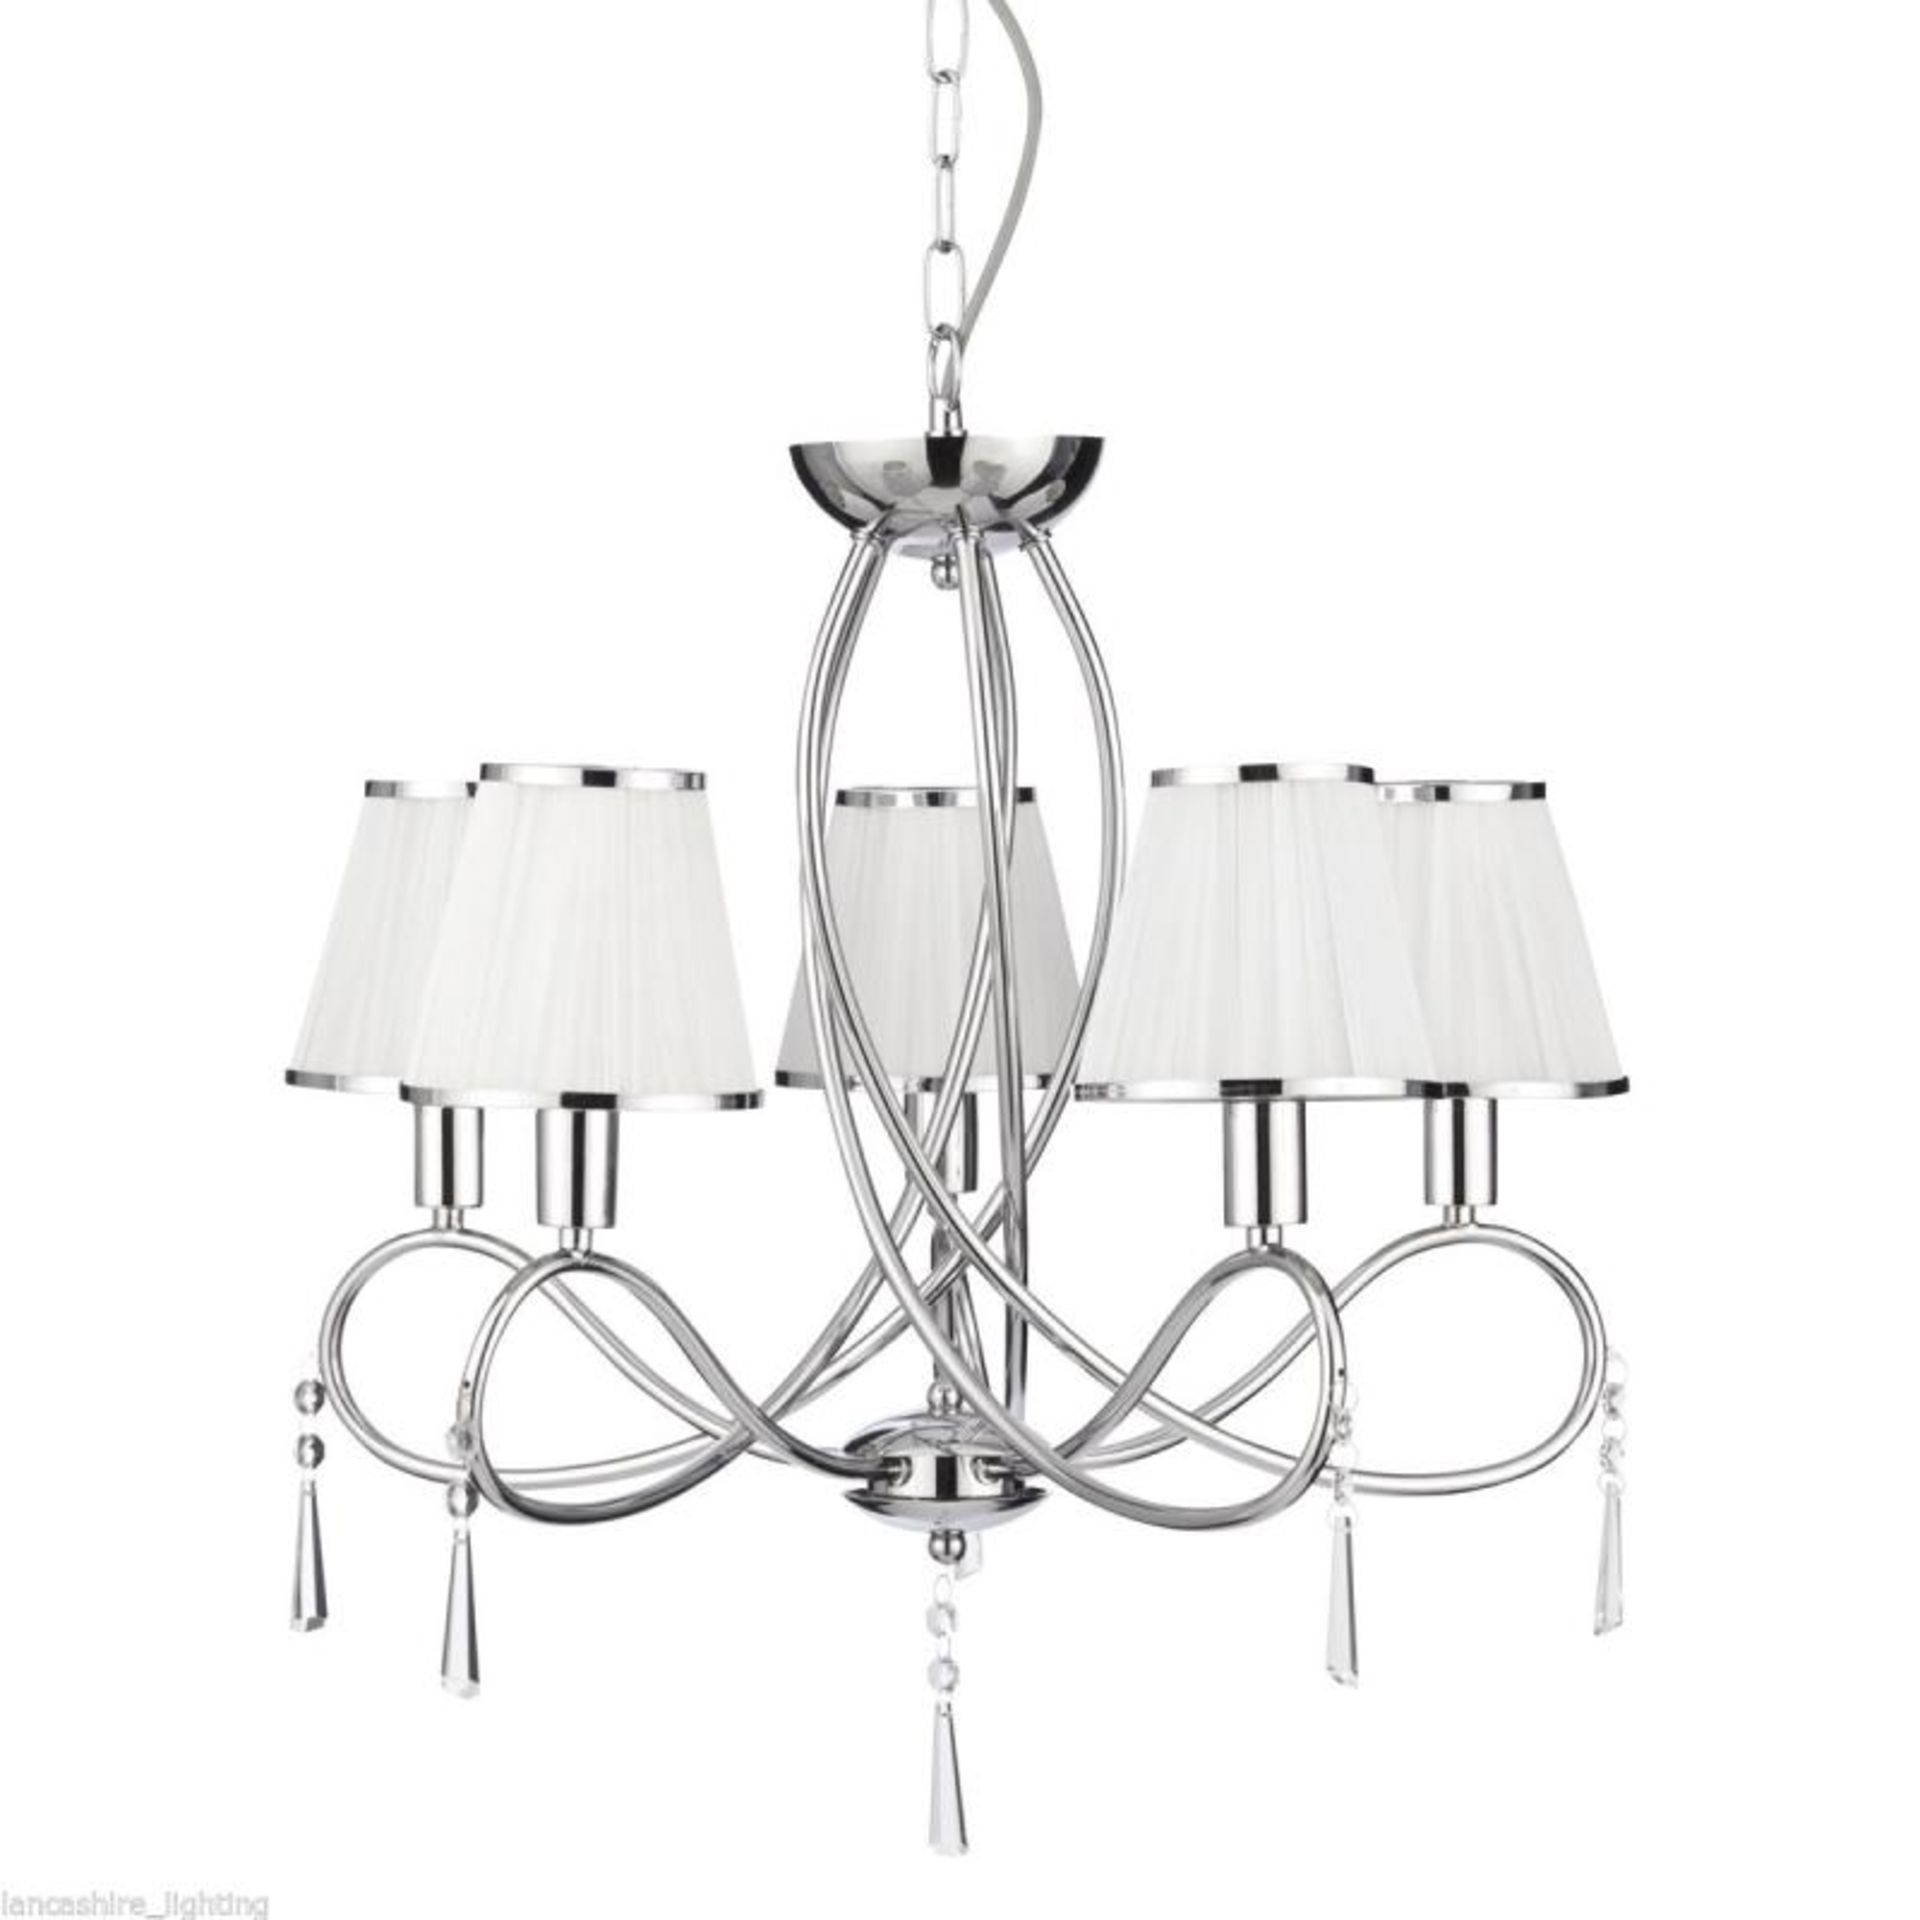 1 x Simplicity Chrome 5 Light Fitting With Glass Drops and White String Shades - Ex Display Stock -